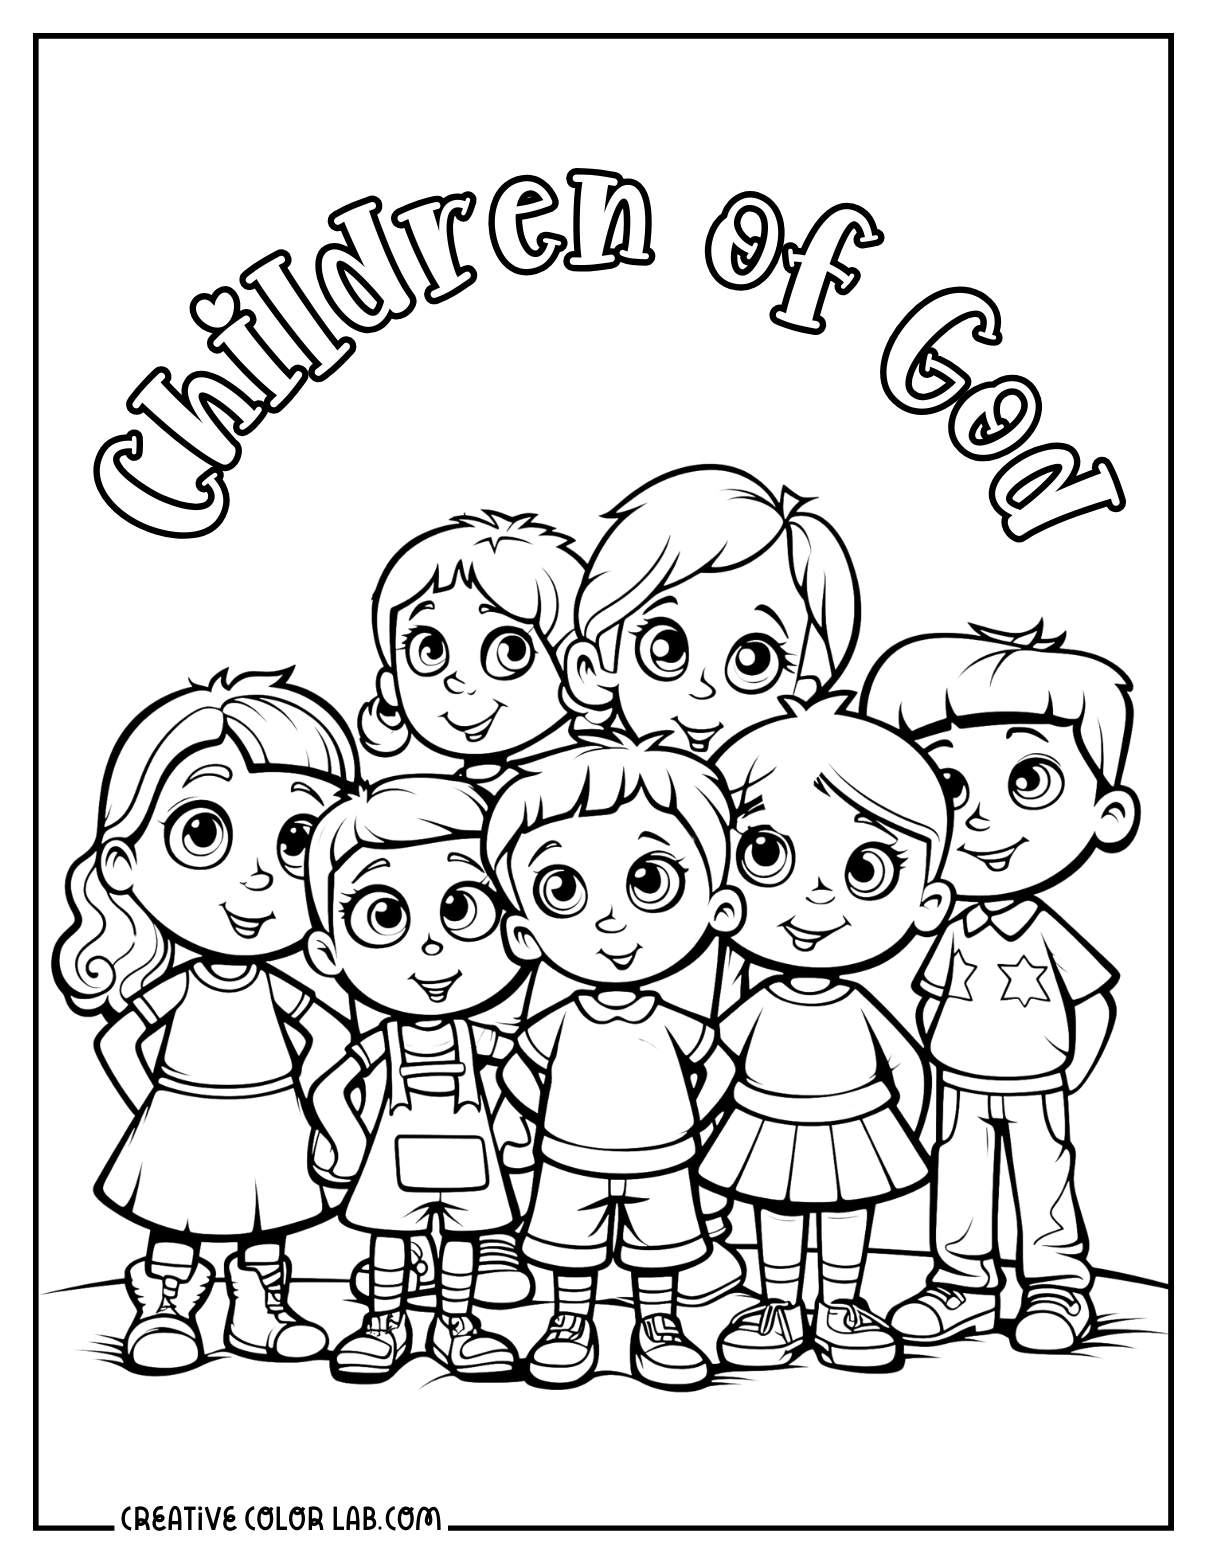 Children of god coloring page for kids.